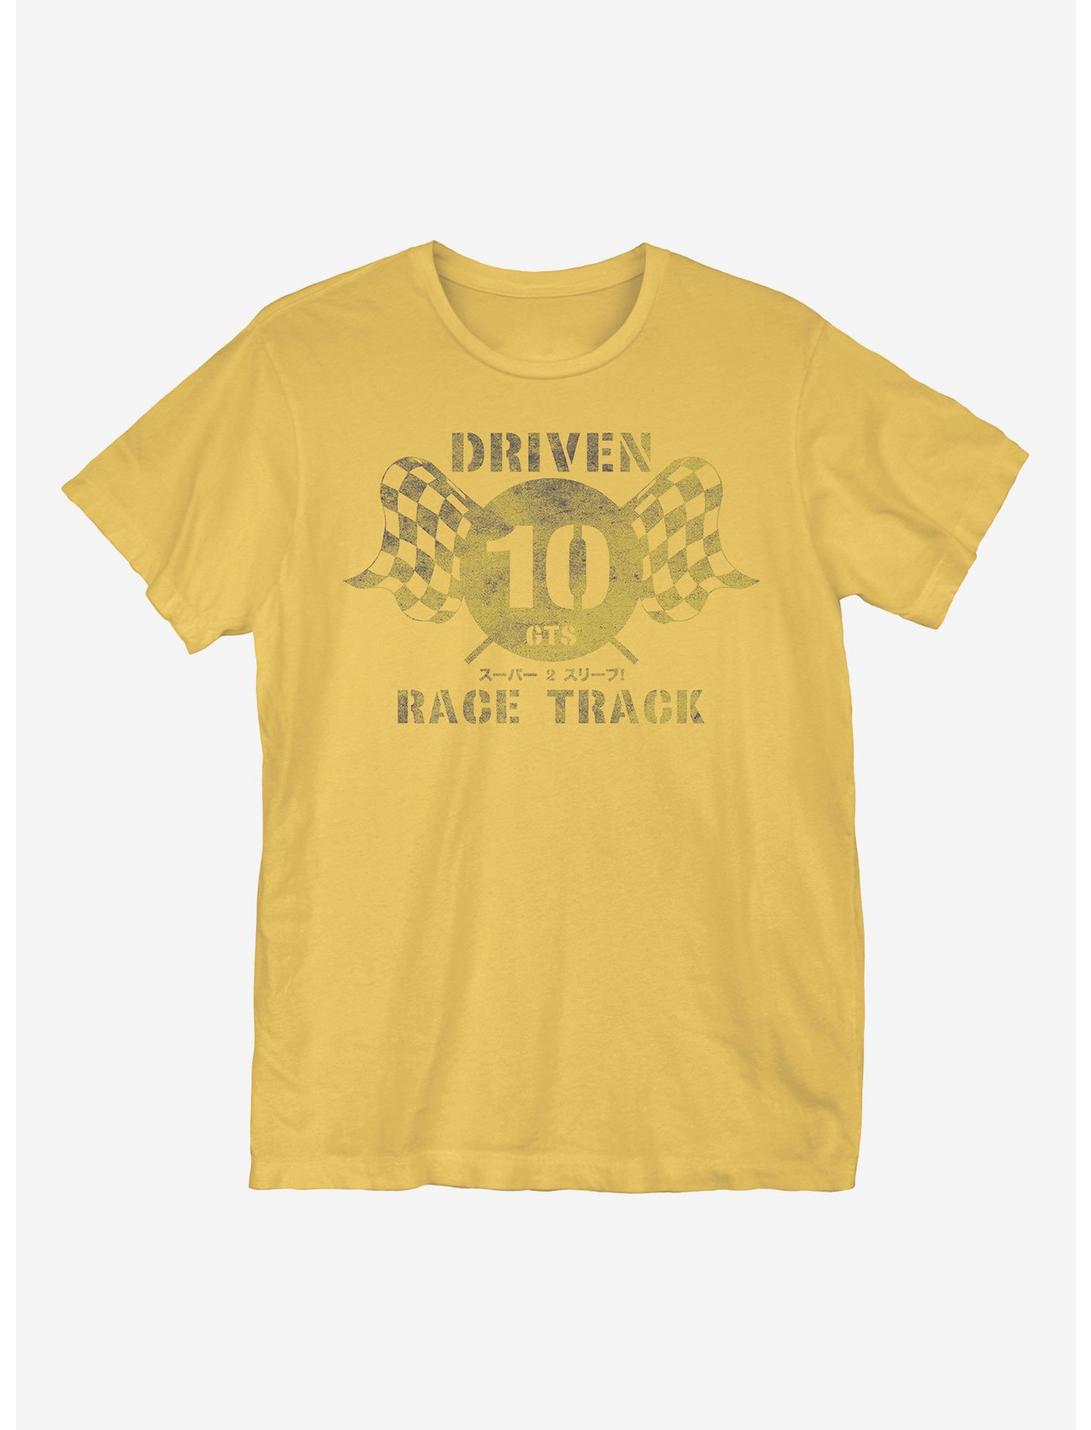 Driven Race Track T-Shirt, SPRING YELLOW, hi-res